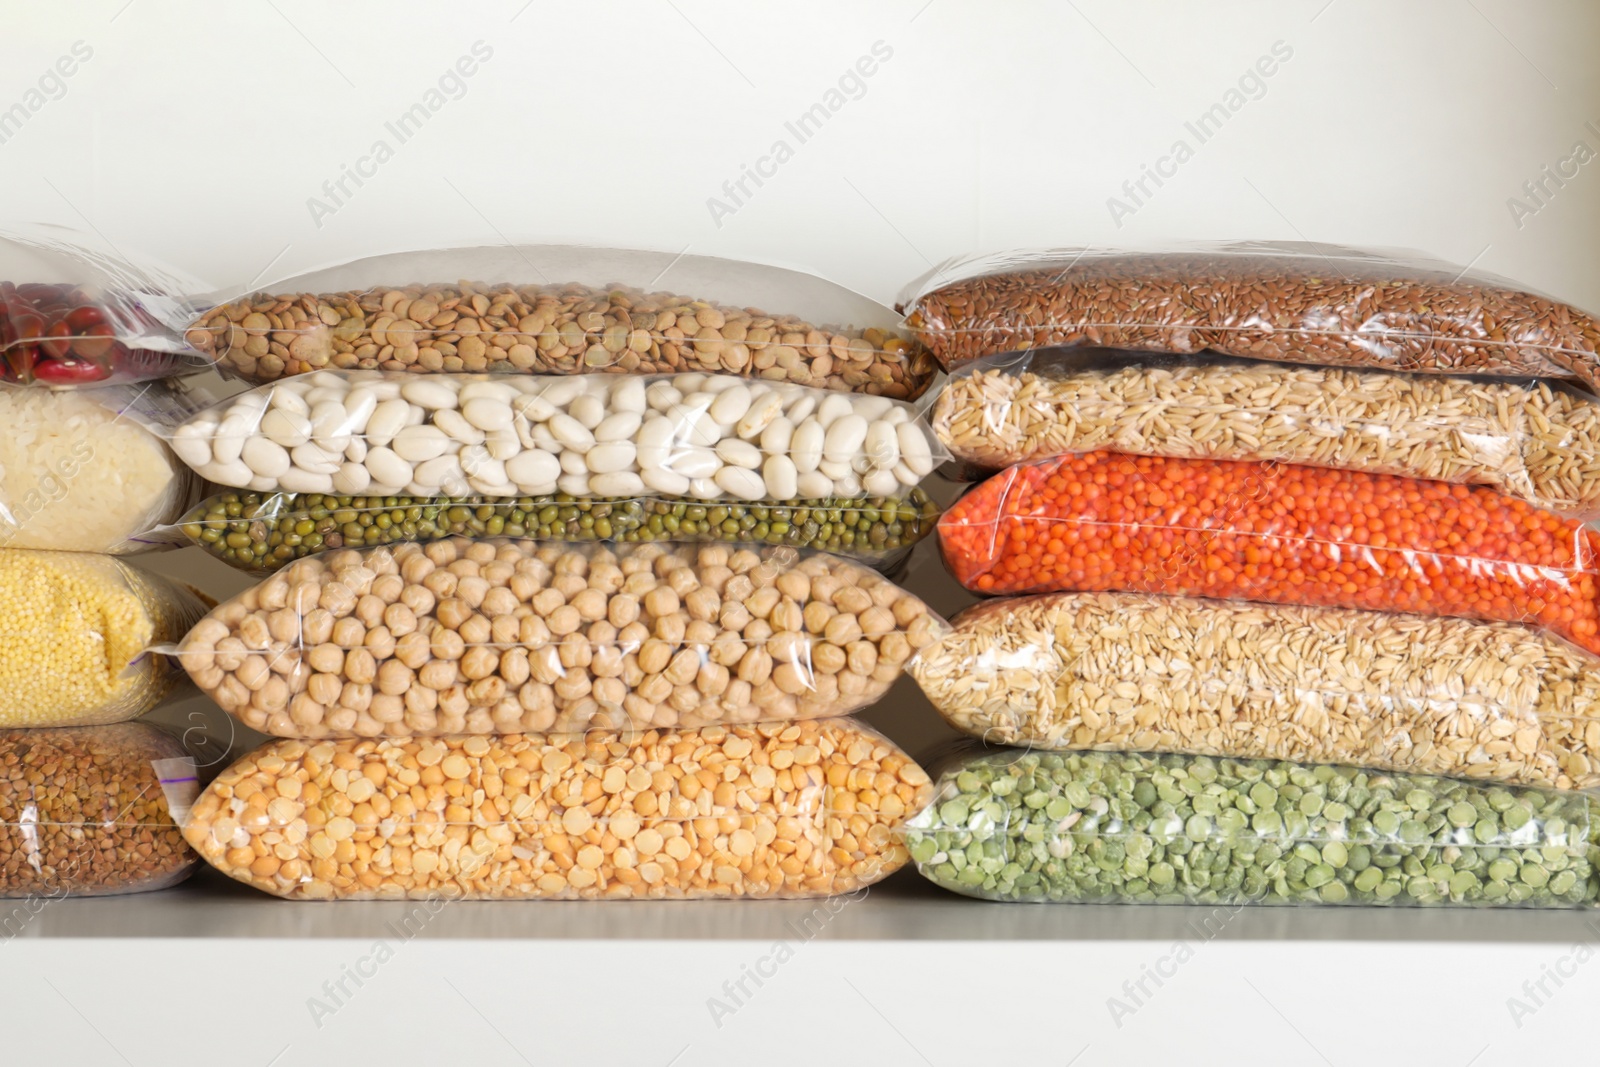 Photo of Different types of legumes and cereals in plastic bags on shelf. Organic grains